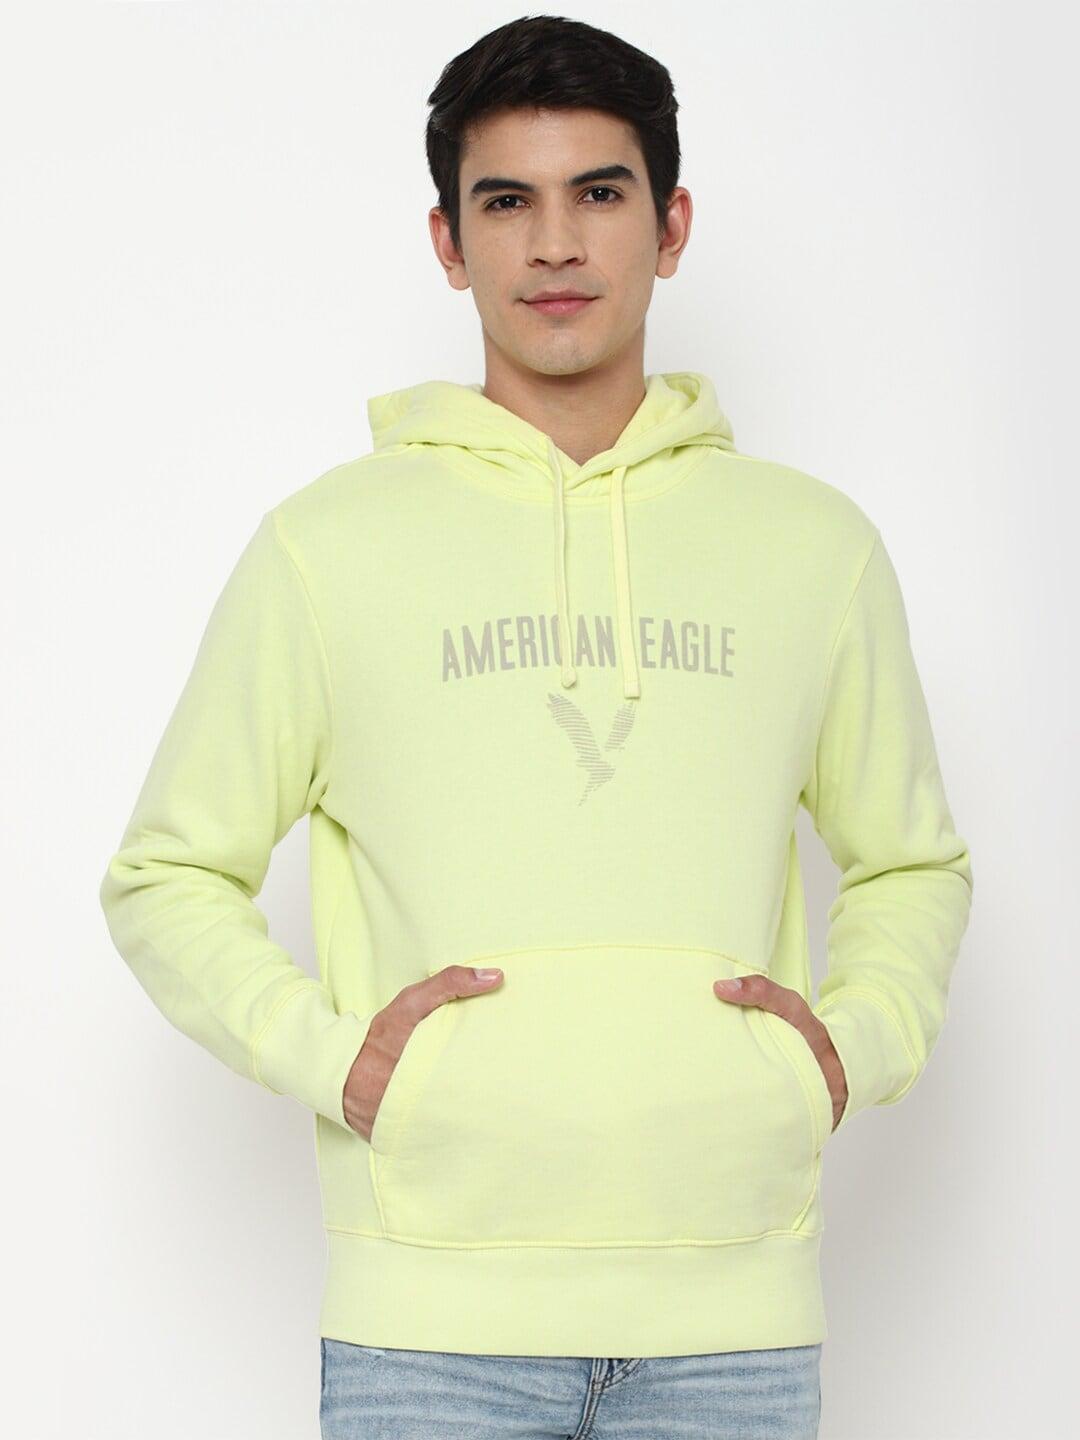 american-eagle-outfitters-men-yellow-printed-hooded-sweatshirt